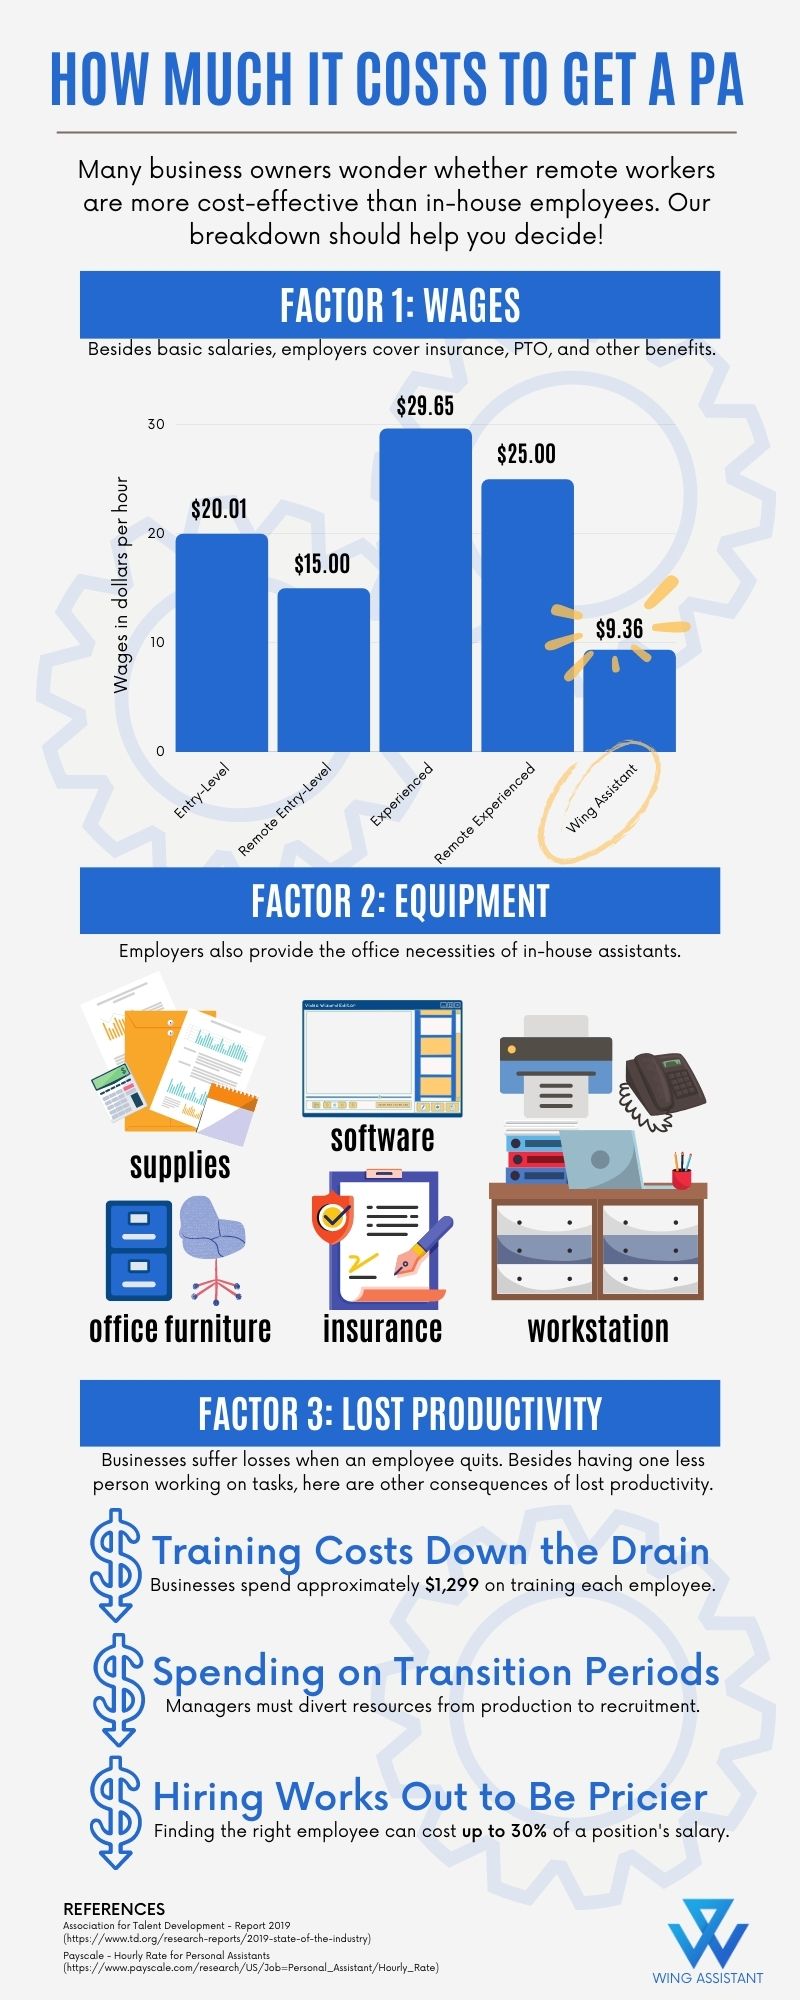 Infographic describing the three main factors business owners must consider when hiring a PA--wages, equipment needed, and lost productivity in case the worker leaves.